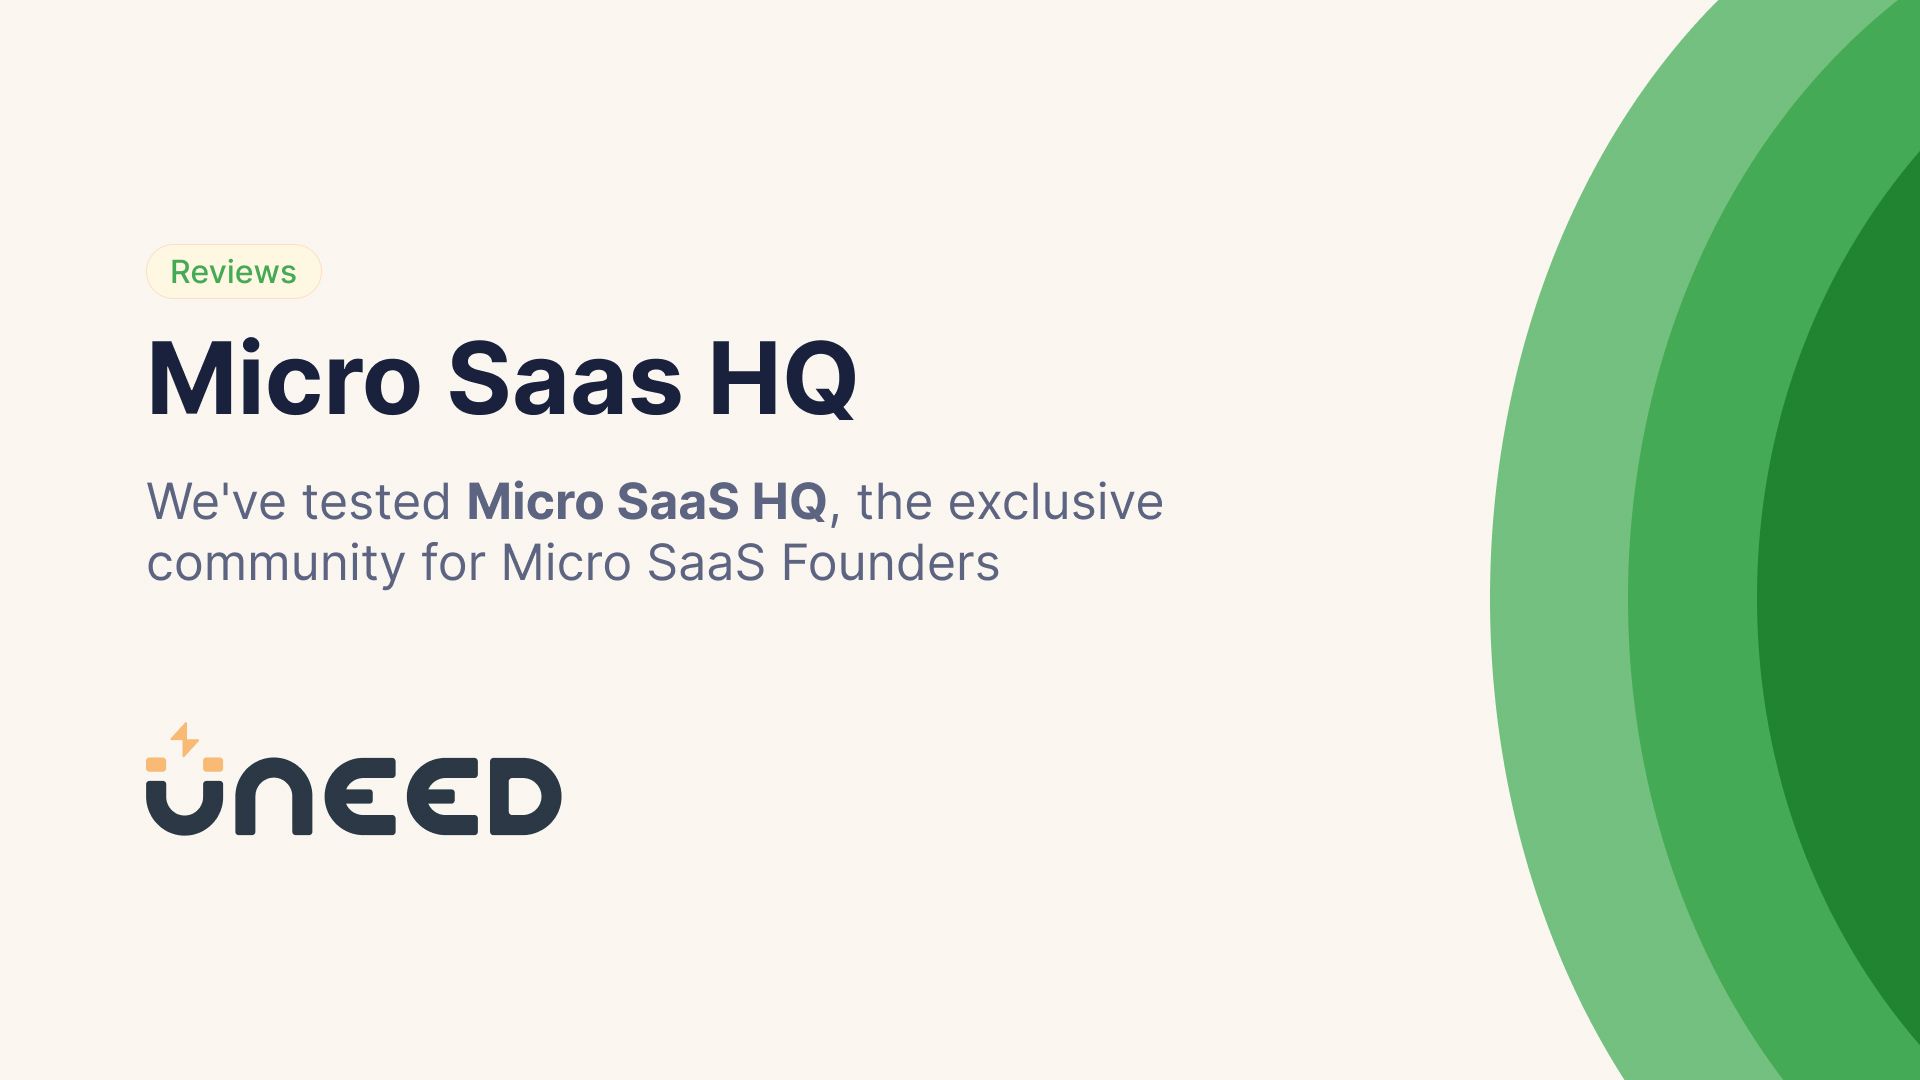 Micro SaaS HQ Review